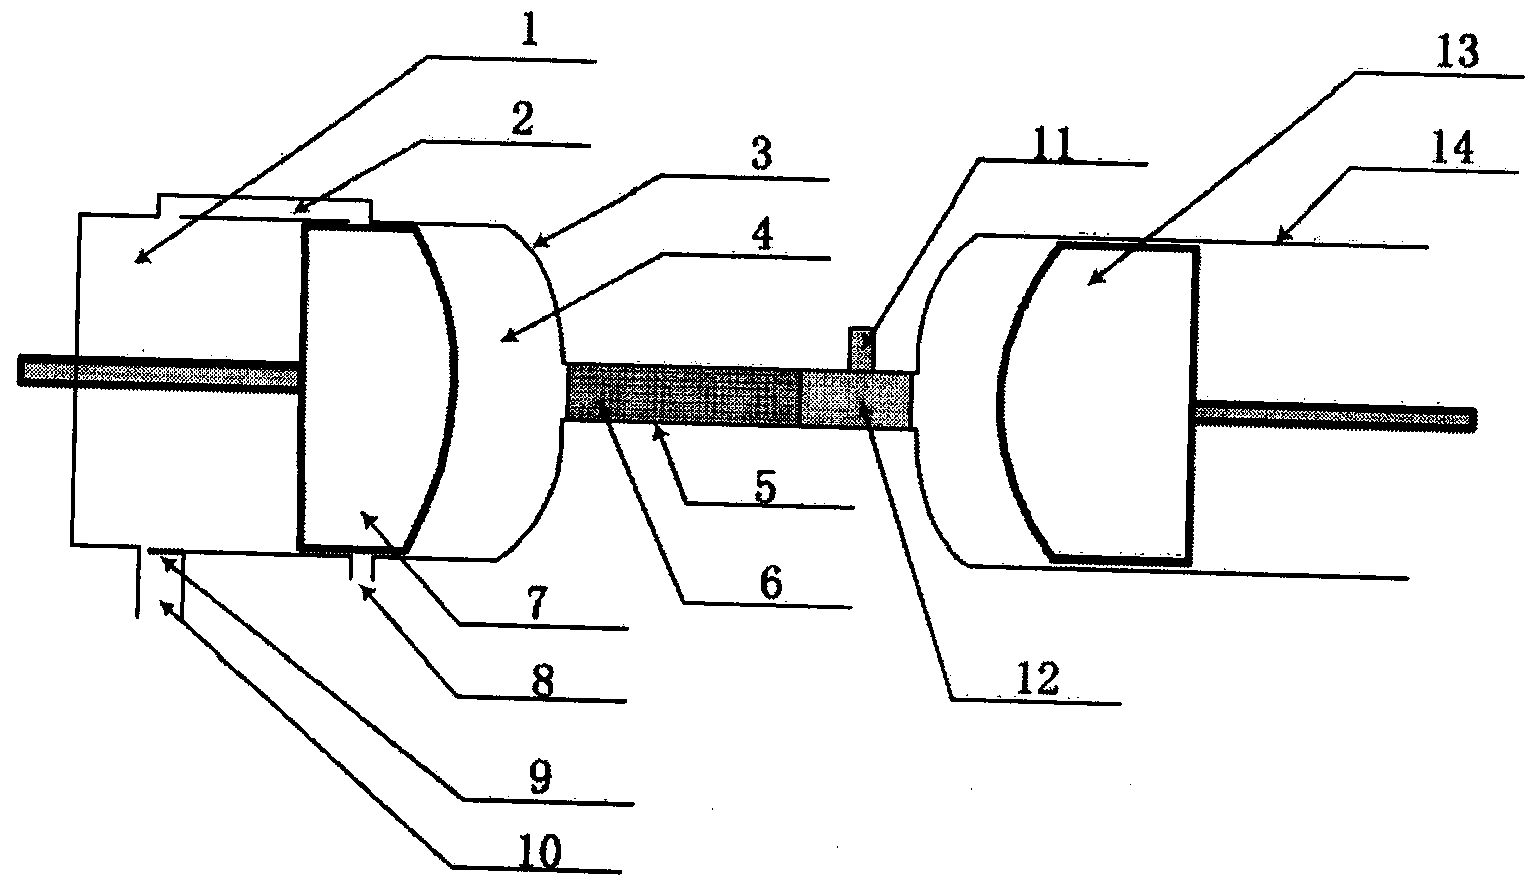 Reciprocating heat accumulating type internal combustion engine for air inlet and air outlet through scavenging duct